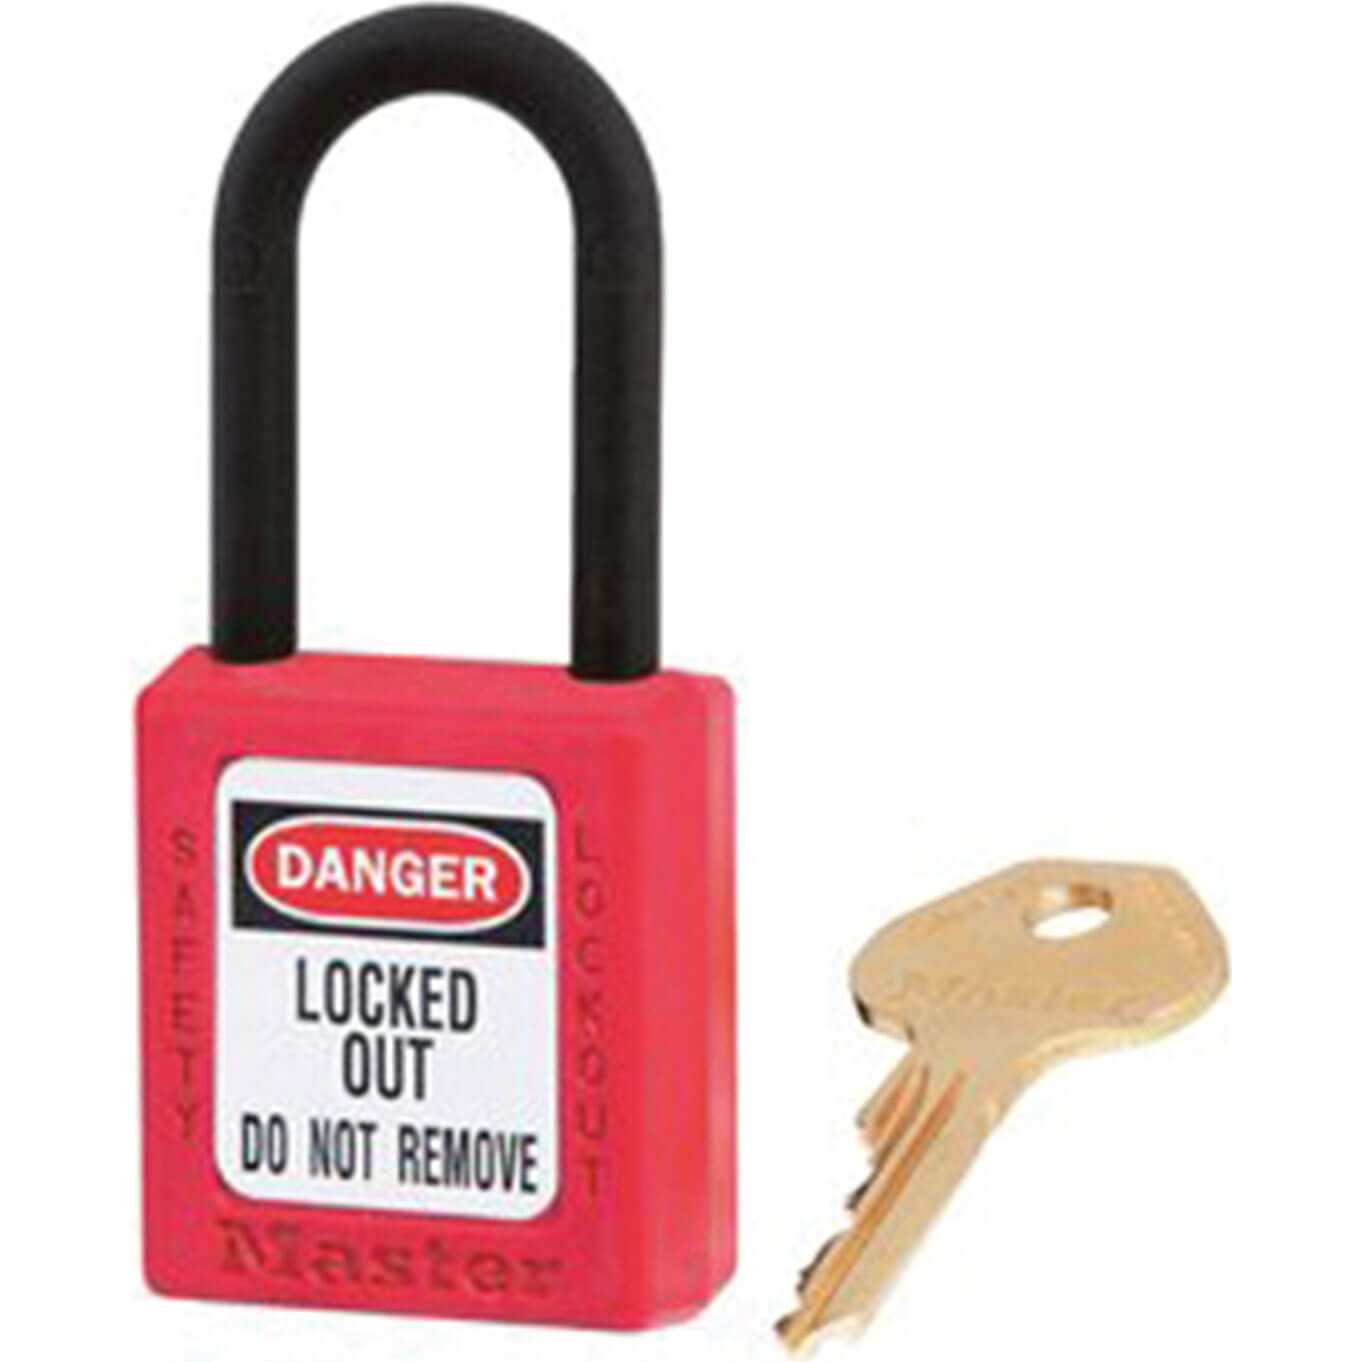 MasterLock 38mm Lockout Padlock with Plastic Shackle Red